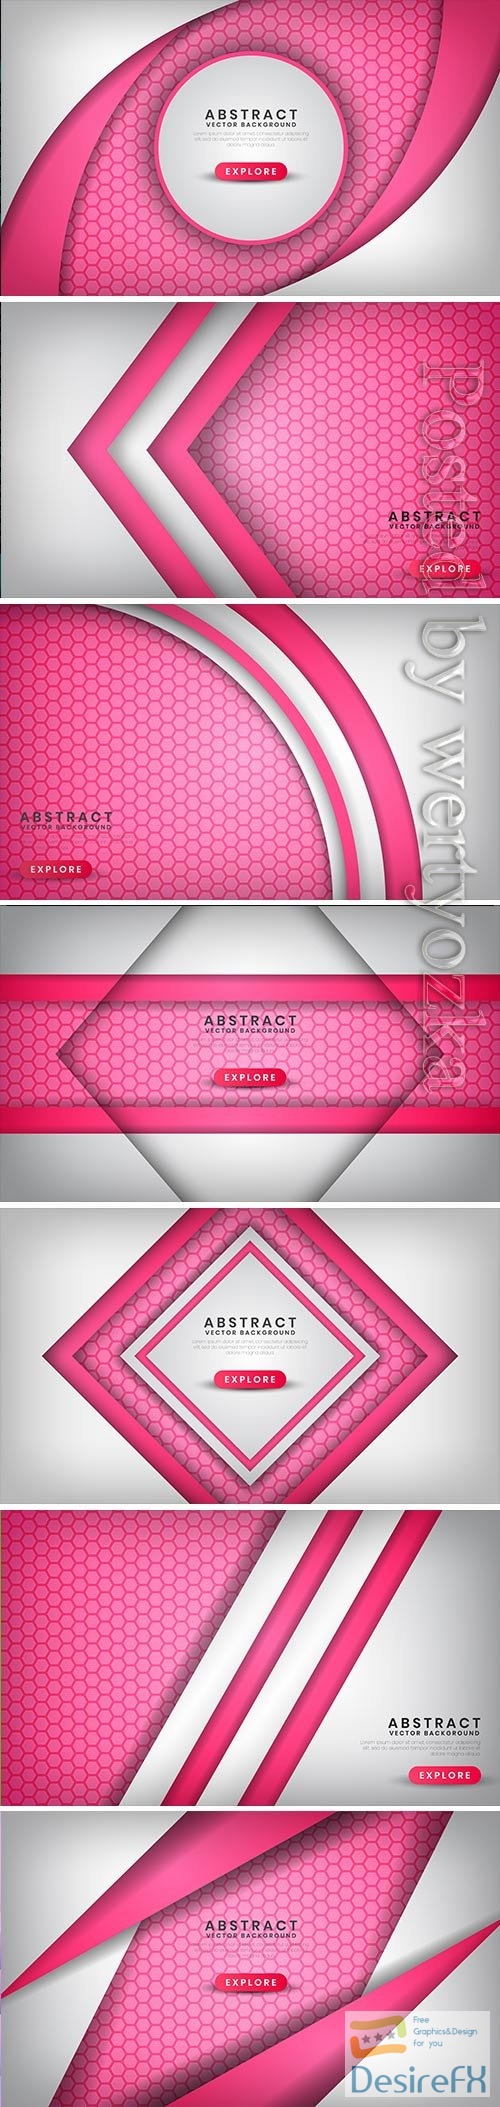 Abstract luxury white and pink background with hexagon patterns